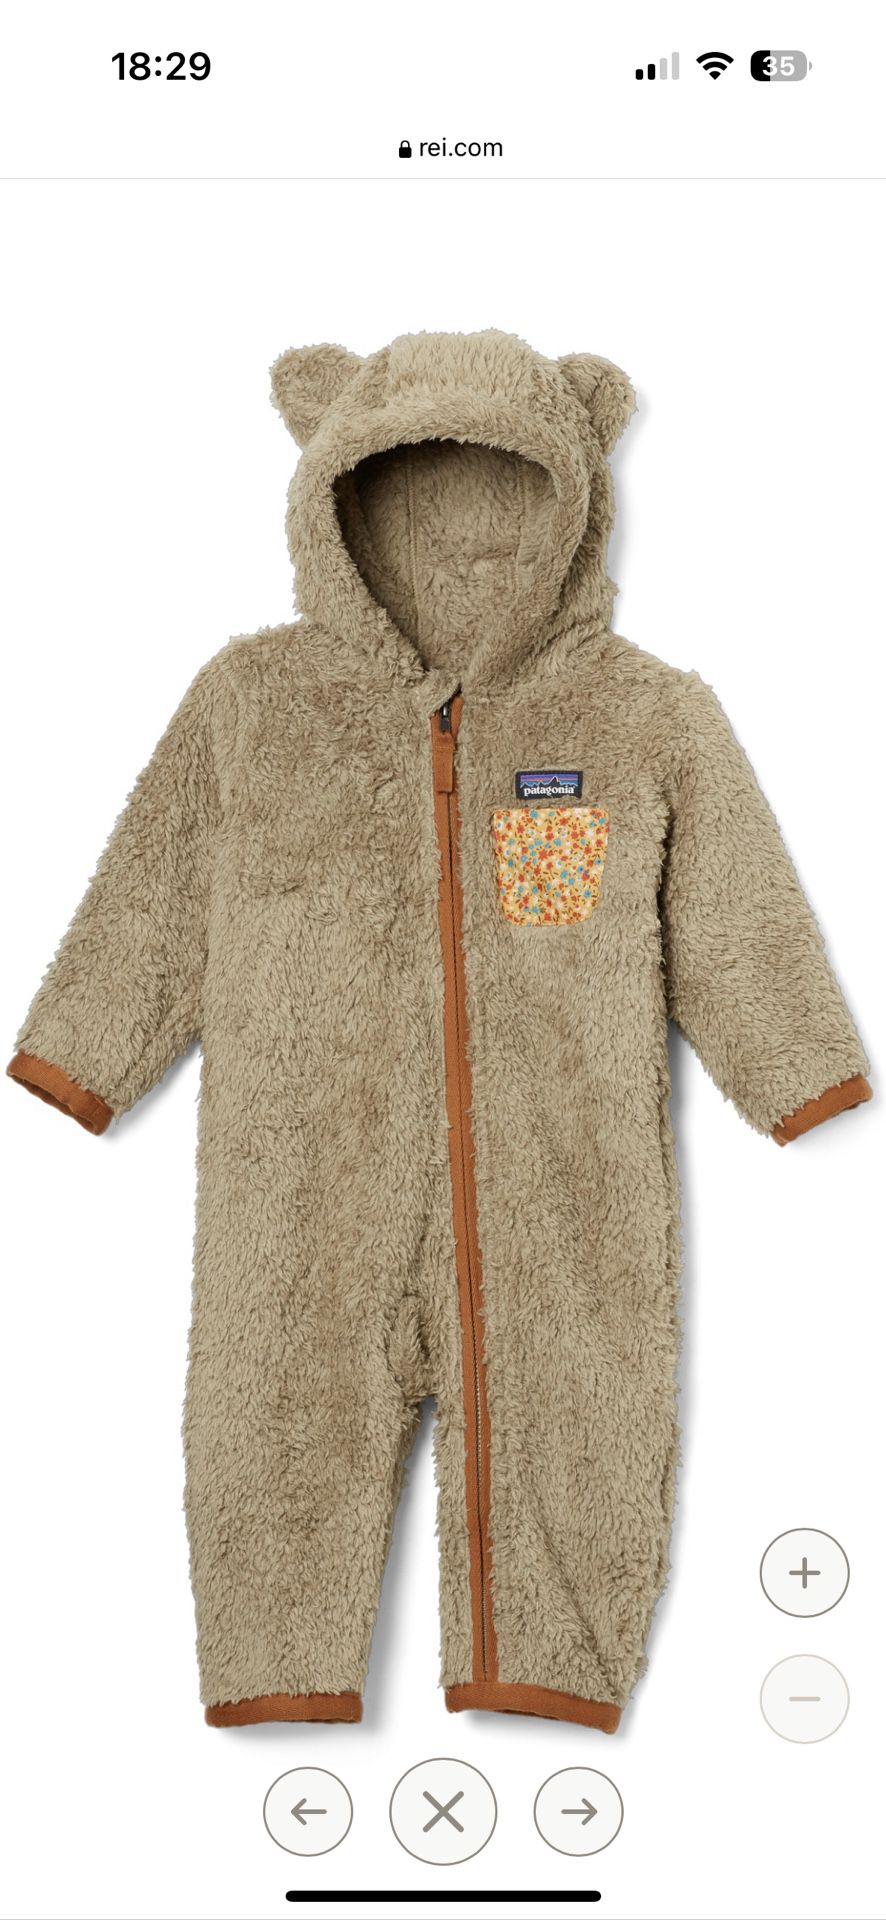 Patagonia Furry Friends Bunting Suit Winter - Infants' 12 - 18 Months